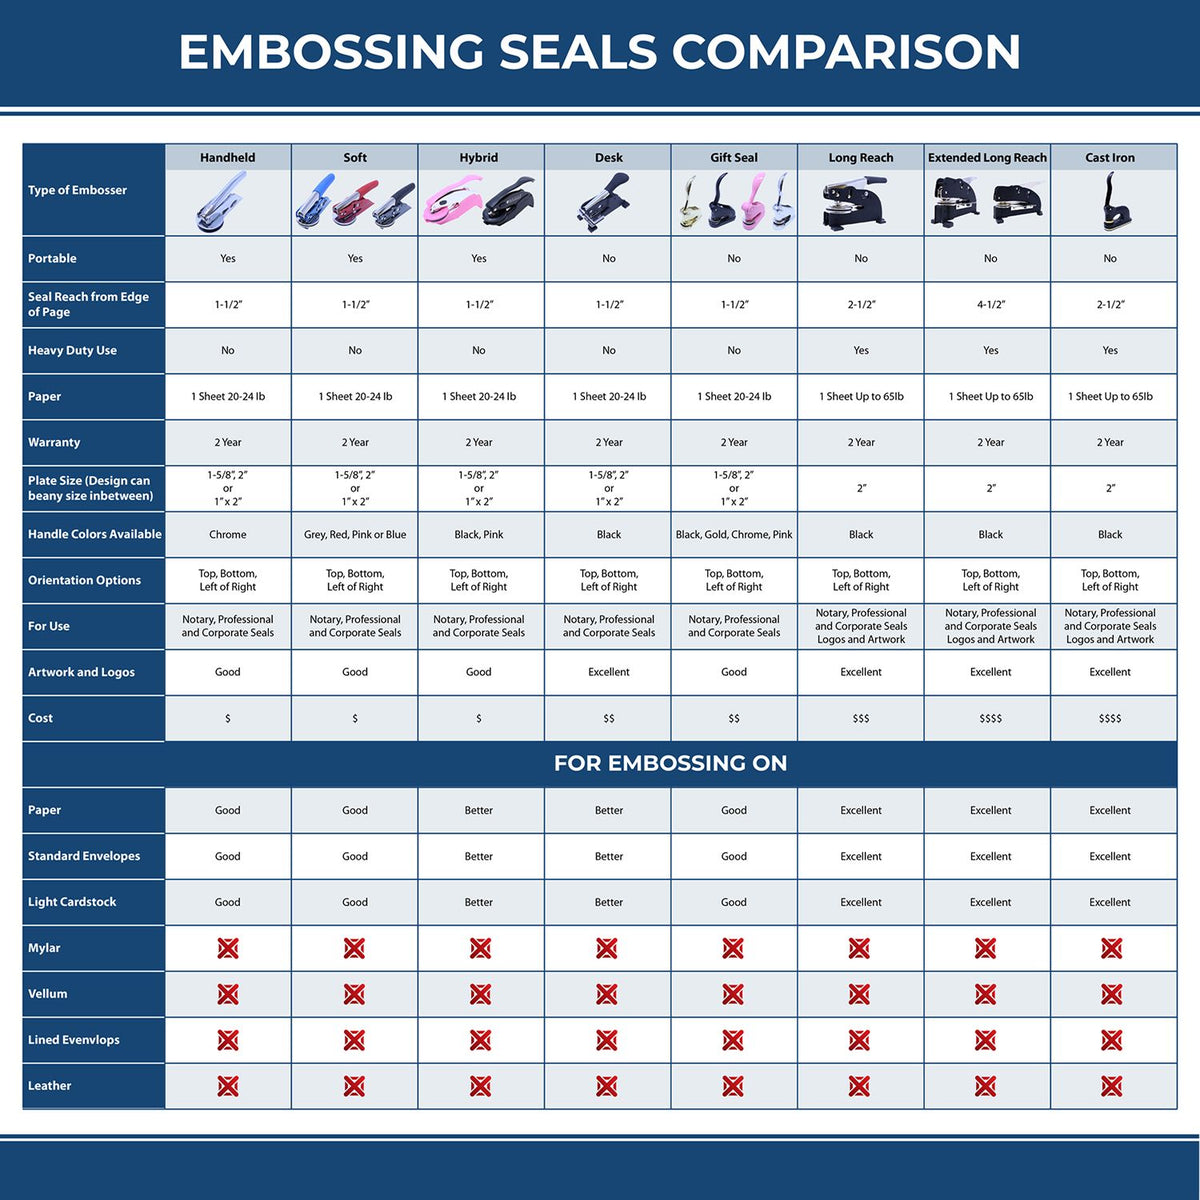 A comparison chart for the different types of mount models available for the State of Maryland Soft Land Surveyor Embossing Seal.